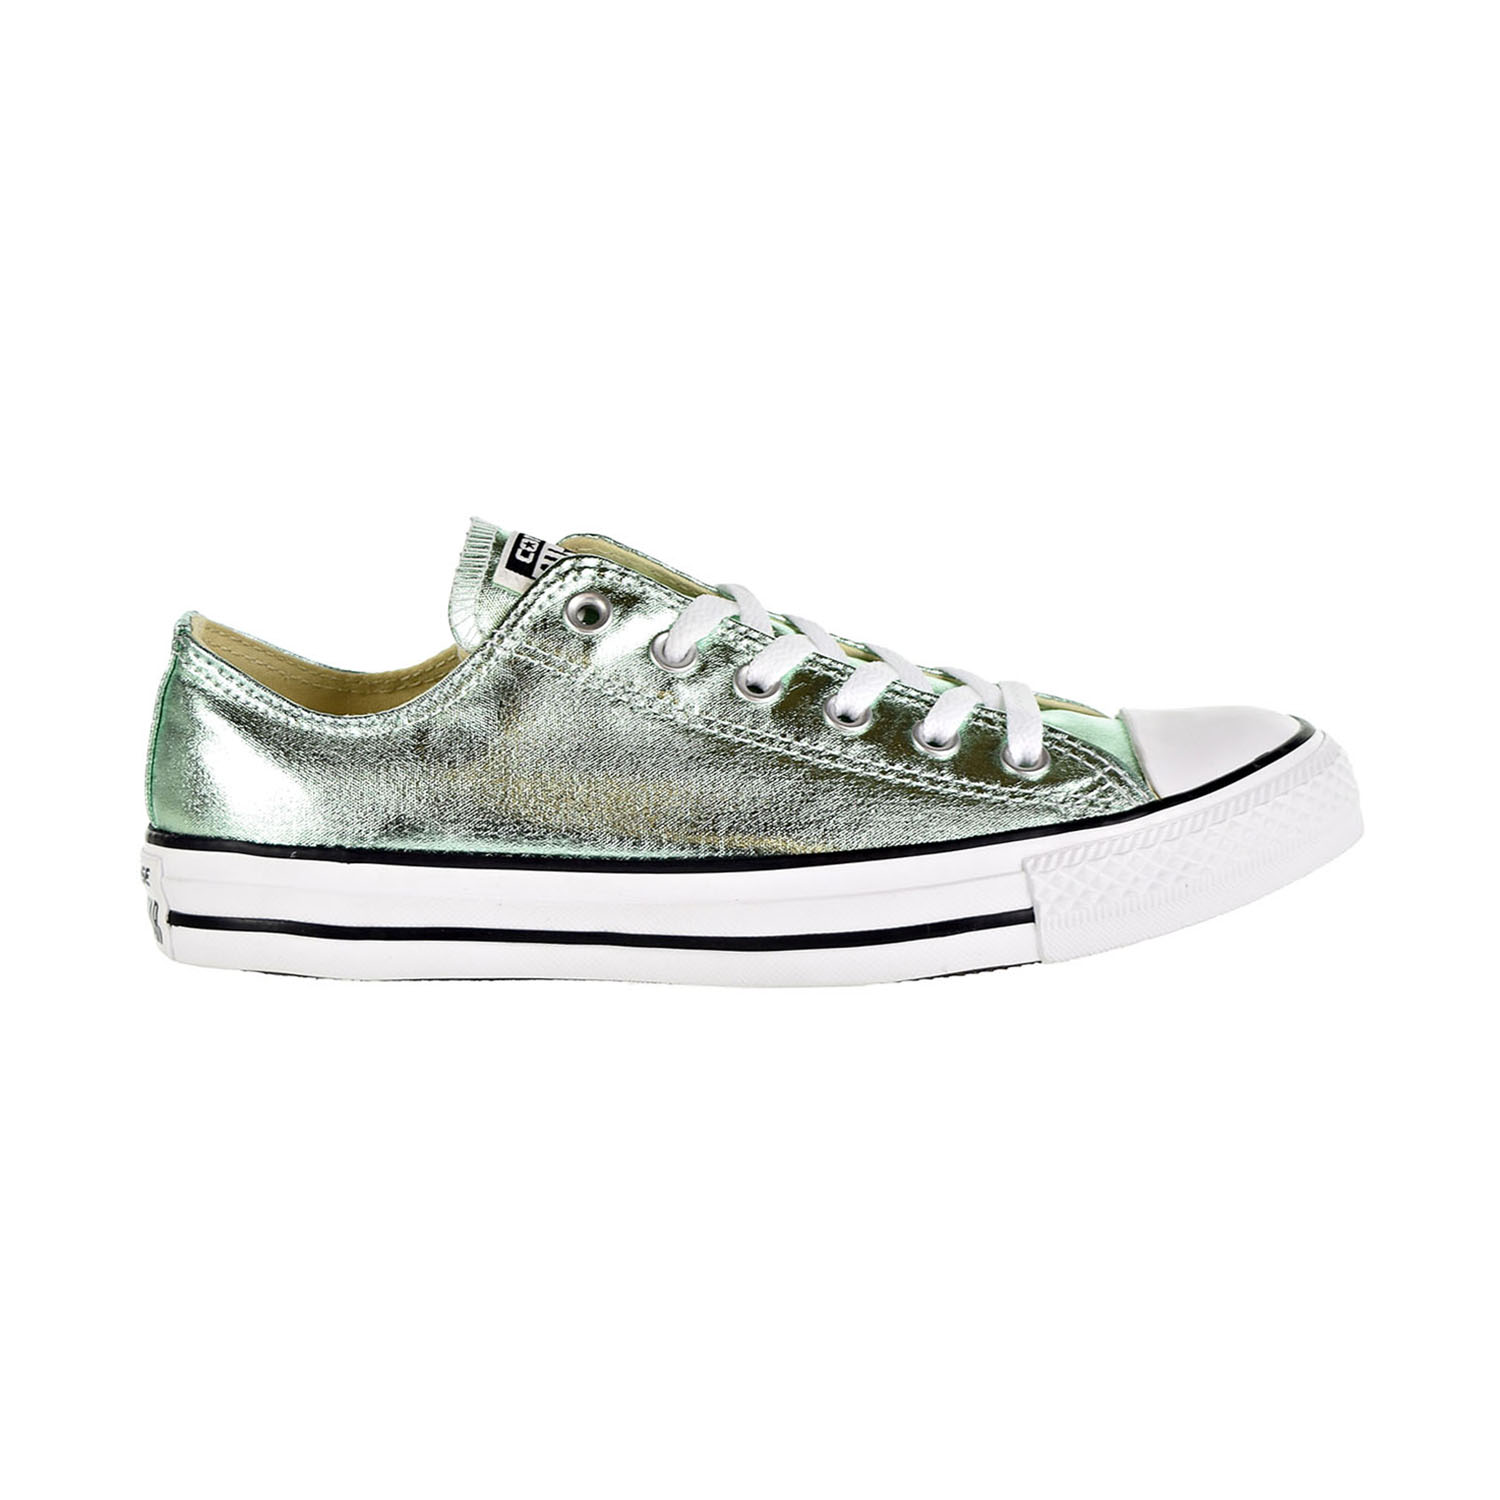 Converse Chuck Taylor All Star Ox Men's Shoes Jade-Black-White 155562f - image 1 of 6